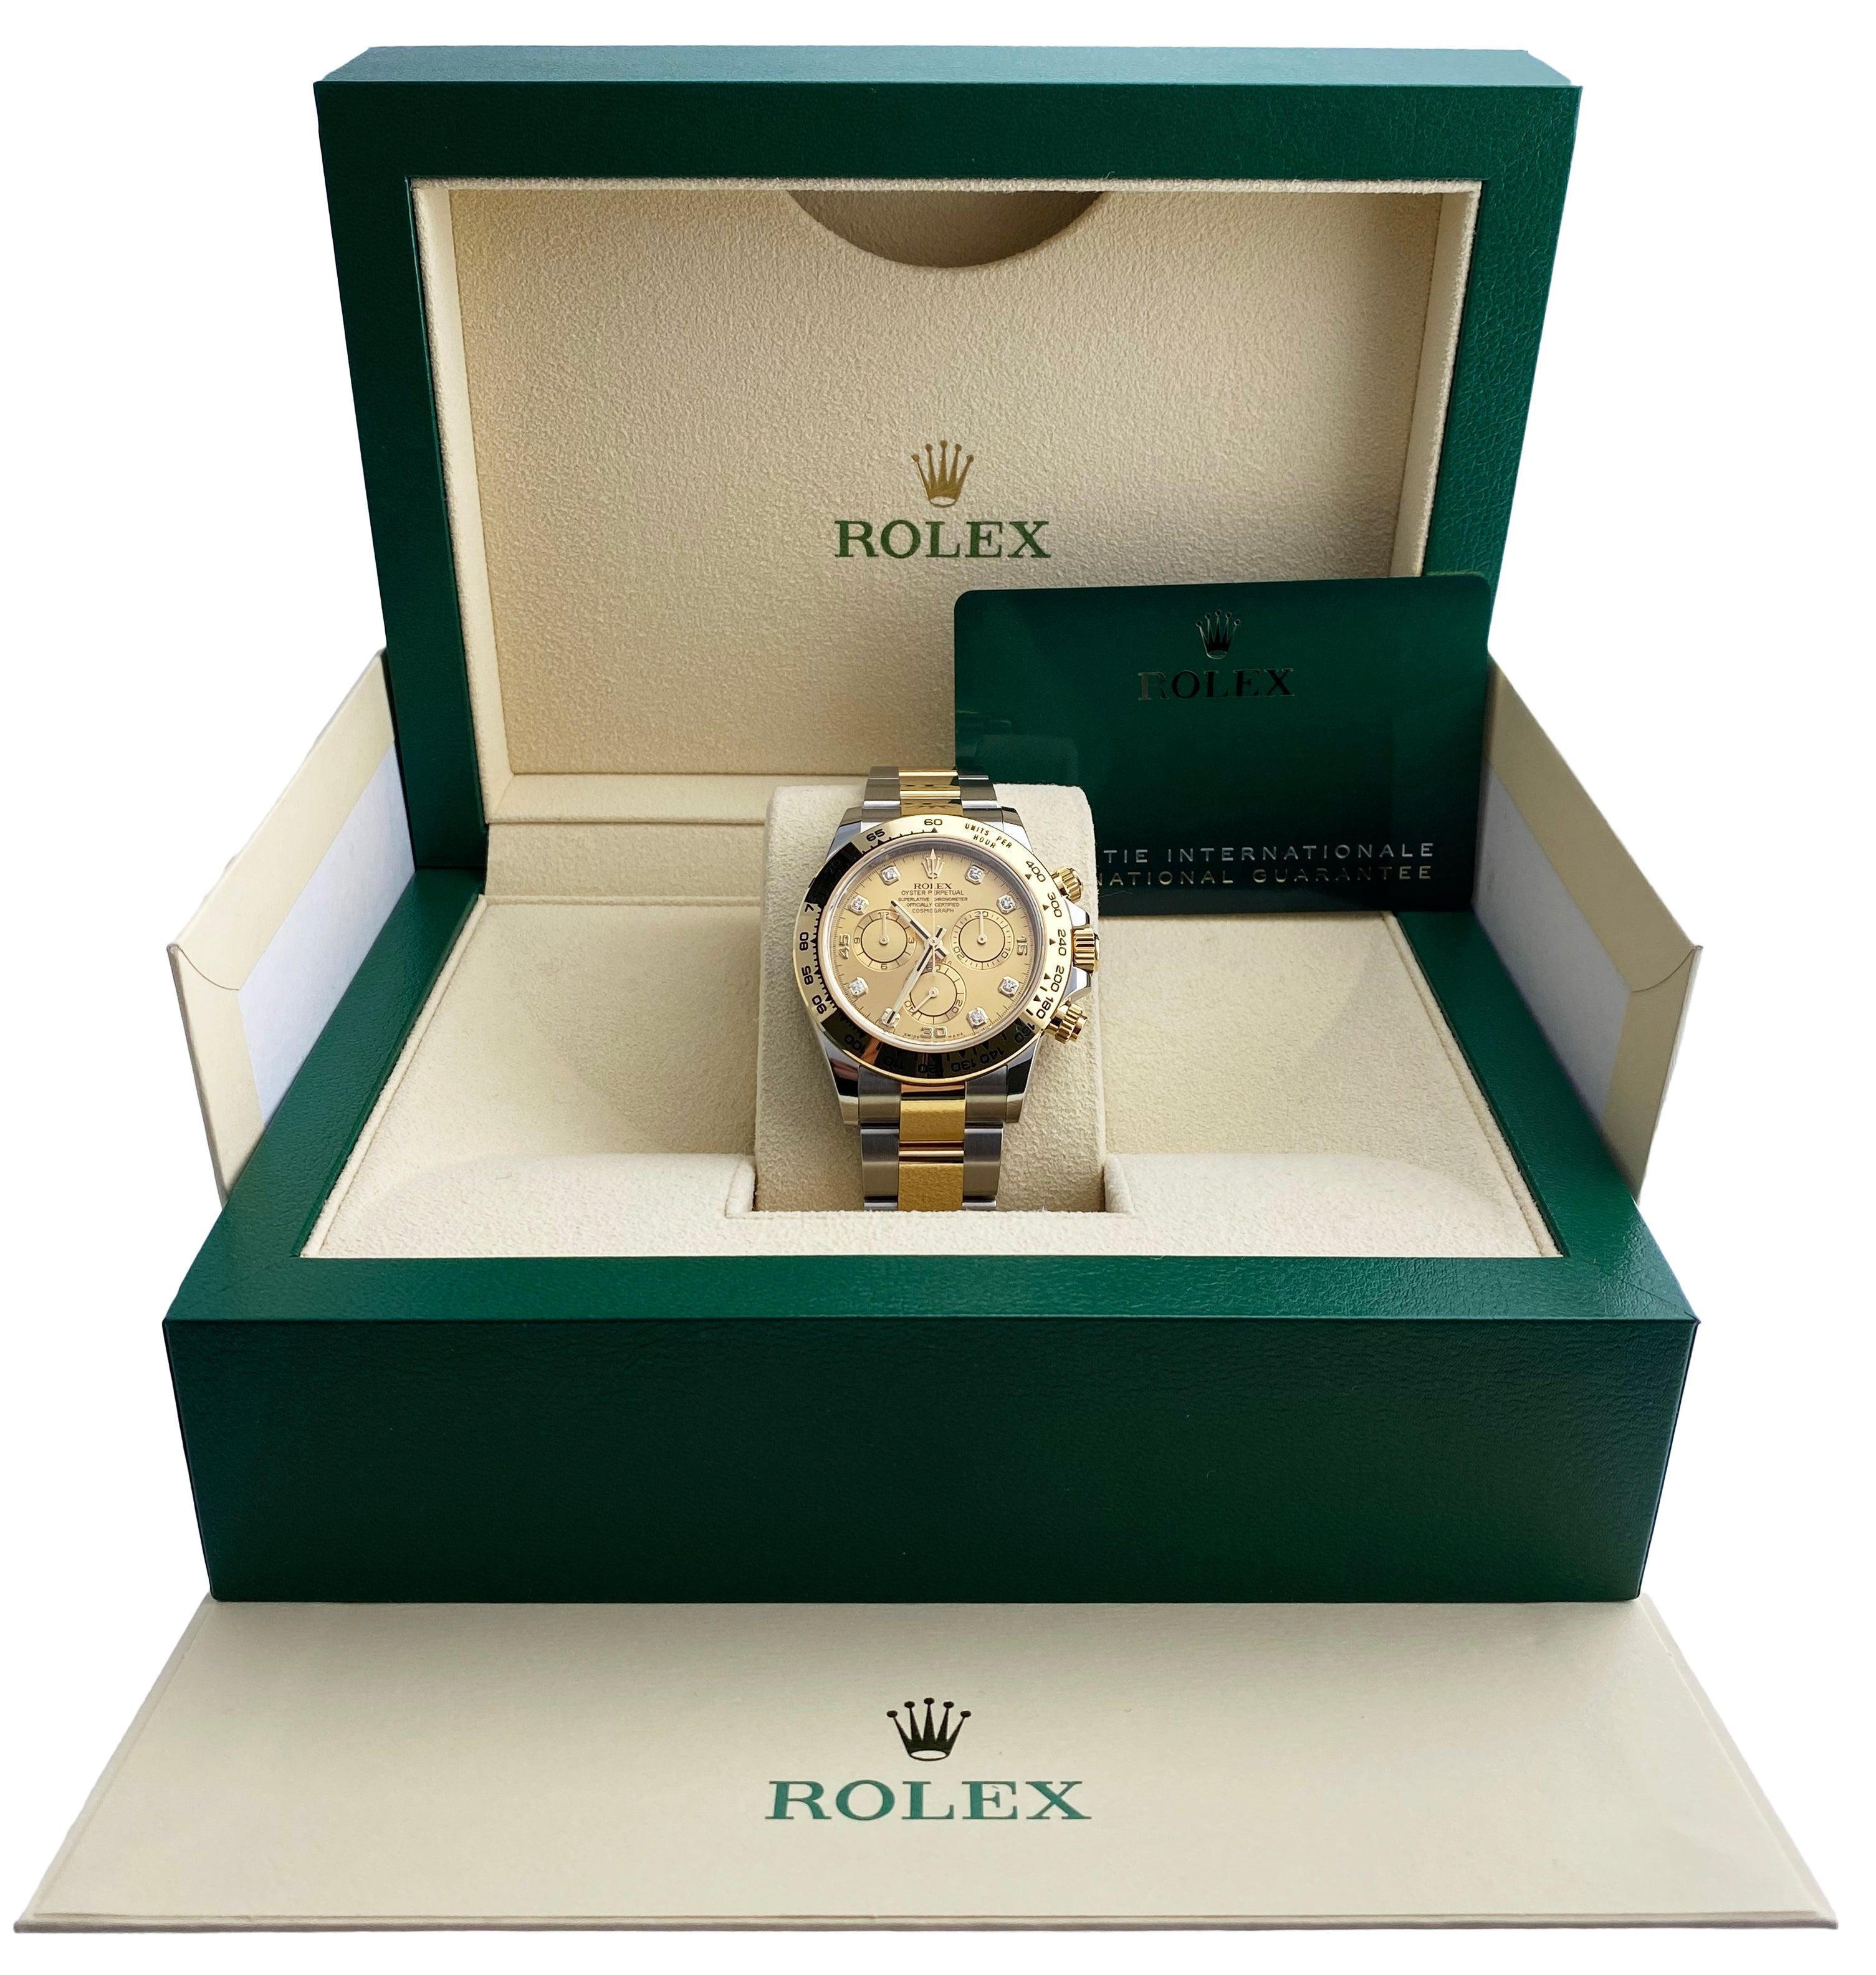 
Rolex Daytona 116503 Mens Watch. 40mm stainless steel case with 18K yellow gold bezel. Champagne diamond dial with luminous hands and index hour marker. Three black sub-dials. Small seconds hand at 6 o'clock. 30-minute counter at 3 o'clock. 12-hour